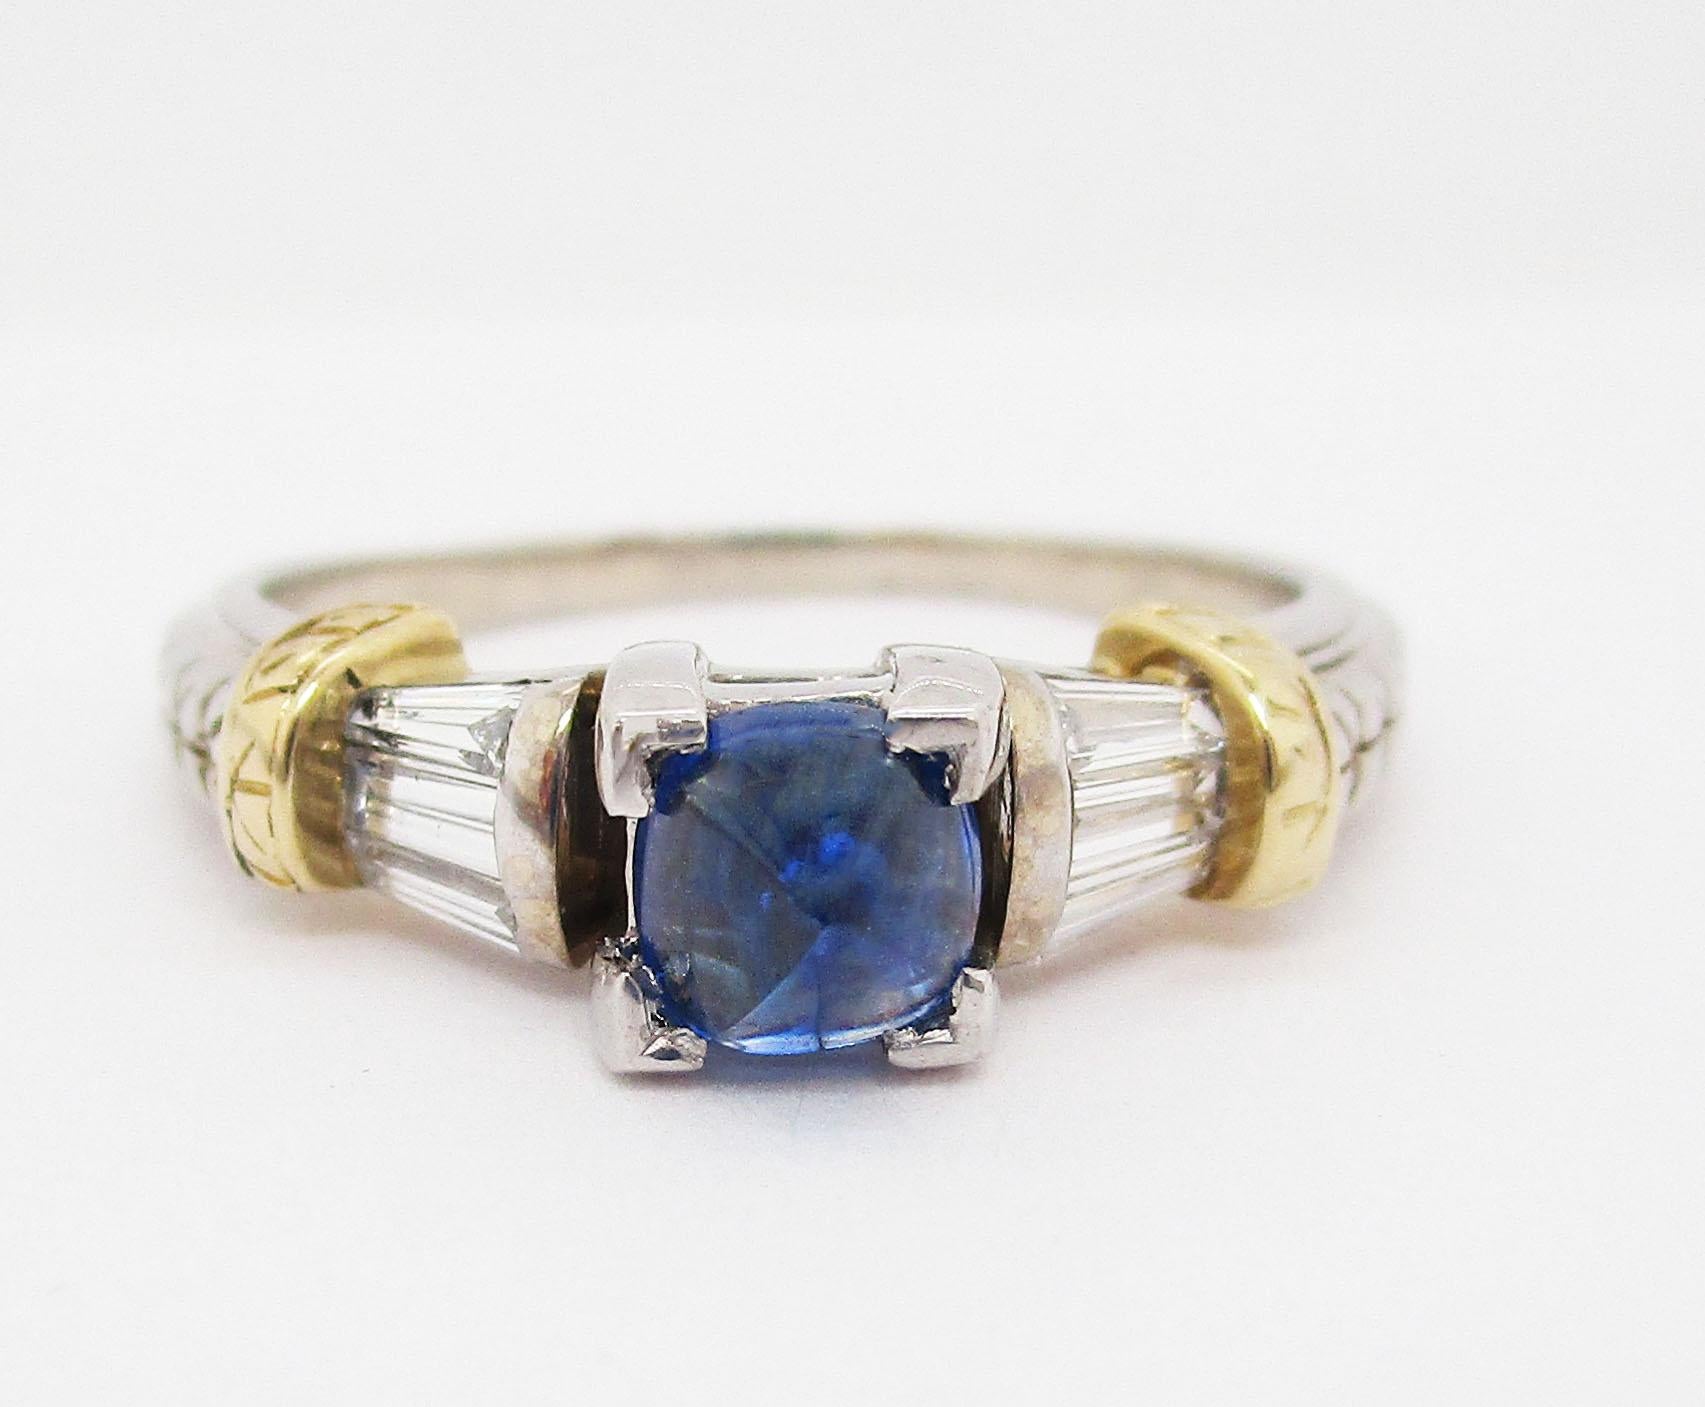 This remarkable ring combines both white and yellow 14k gold to frame stunning white baguette diamonds and a breathtaking natural blue sapphire! The white gold shank of the ring has a gorgeous engraved design that runs up the shoulders to create